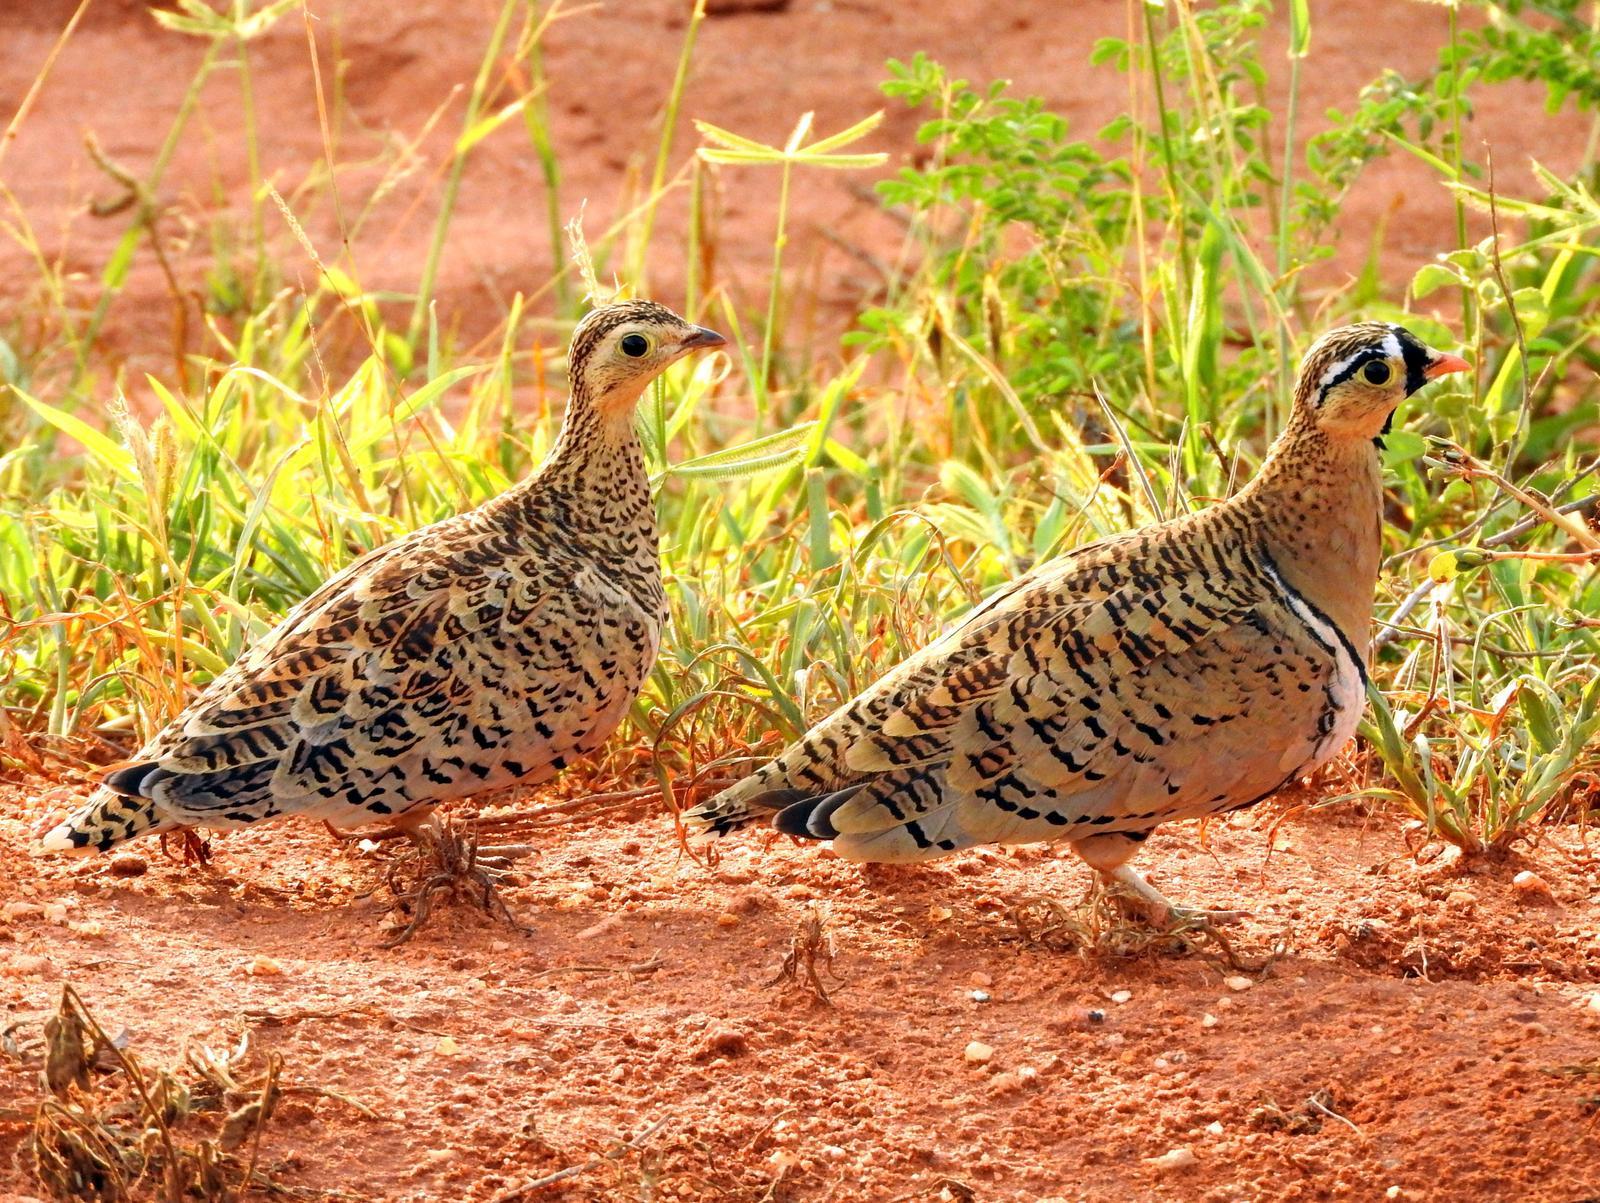 Black-faced Sandgrouse Photo by Todd A. Watkins